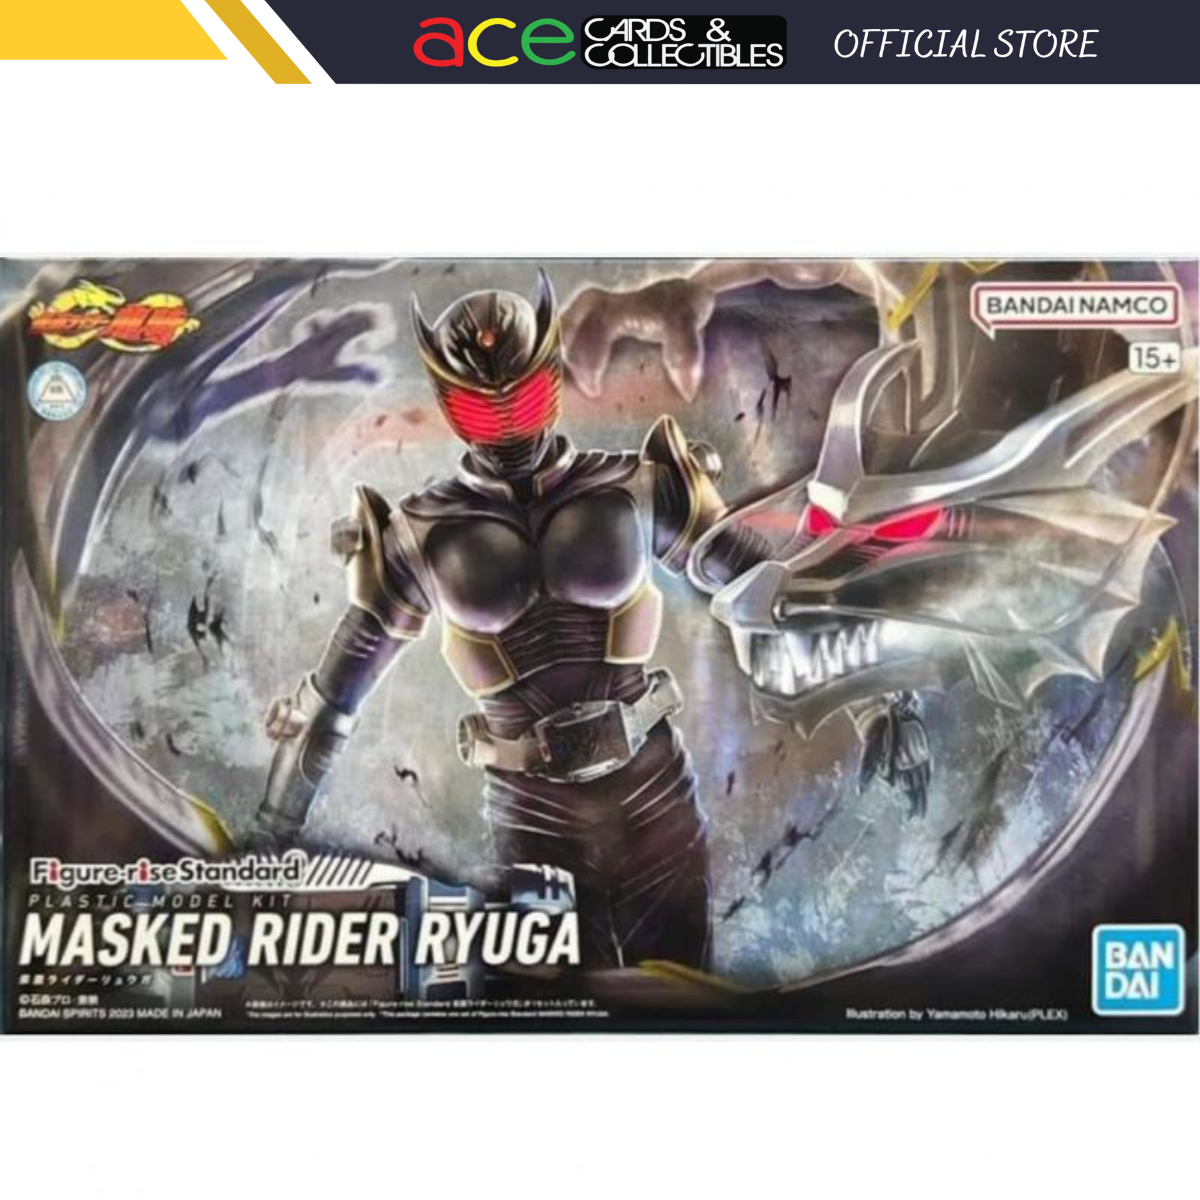 Figure-rise Standard Masked Rider "Ryuga"-Bandai-Ace Cards & Collectibles